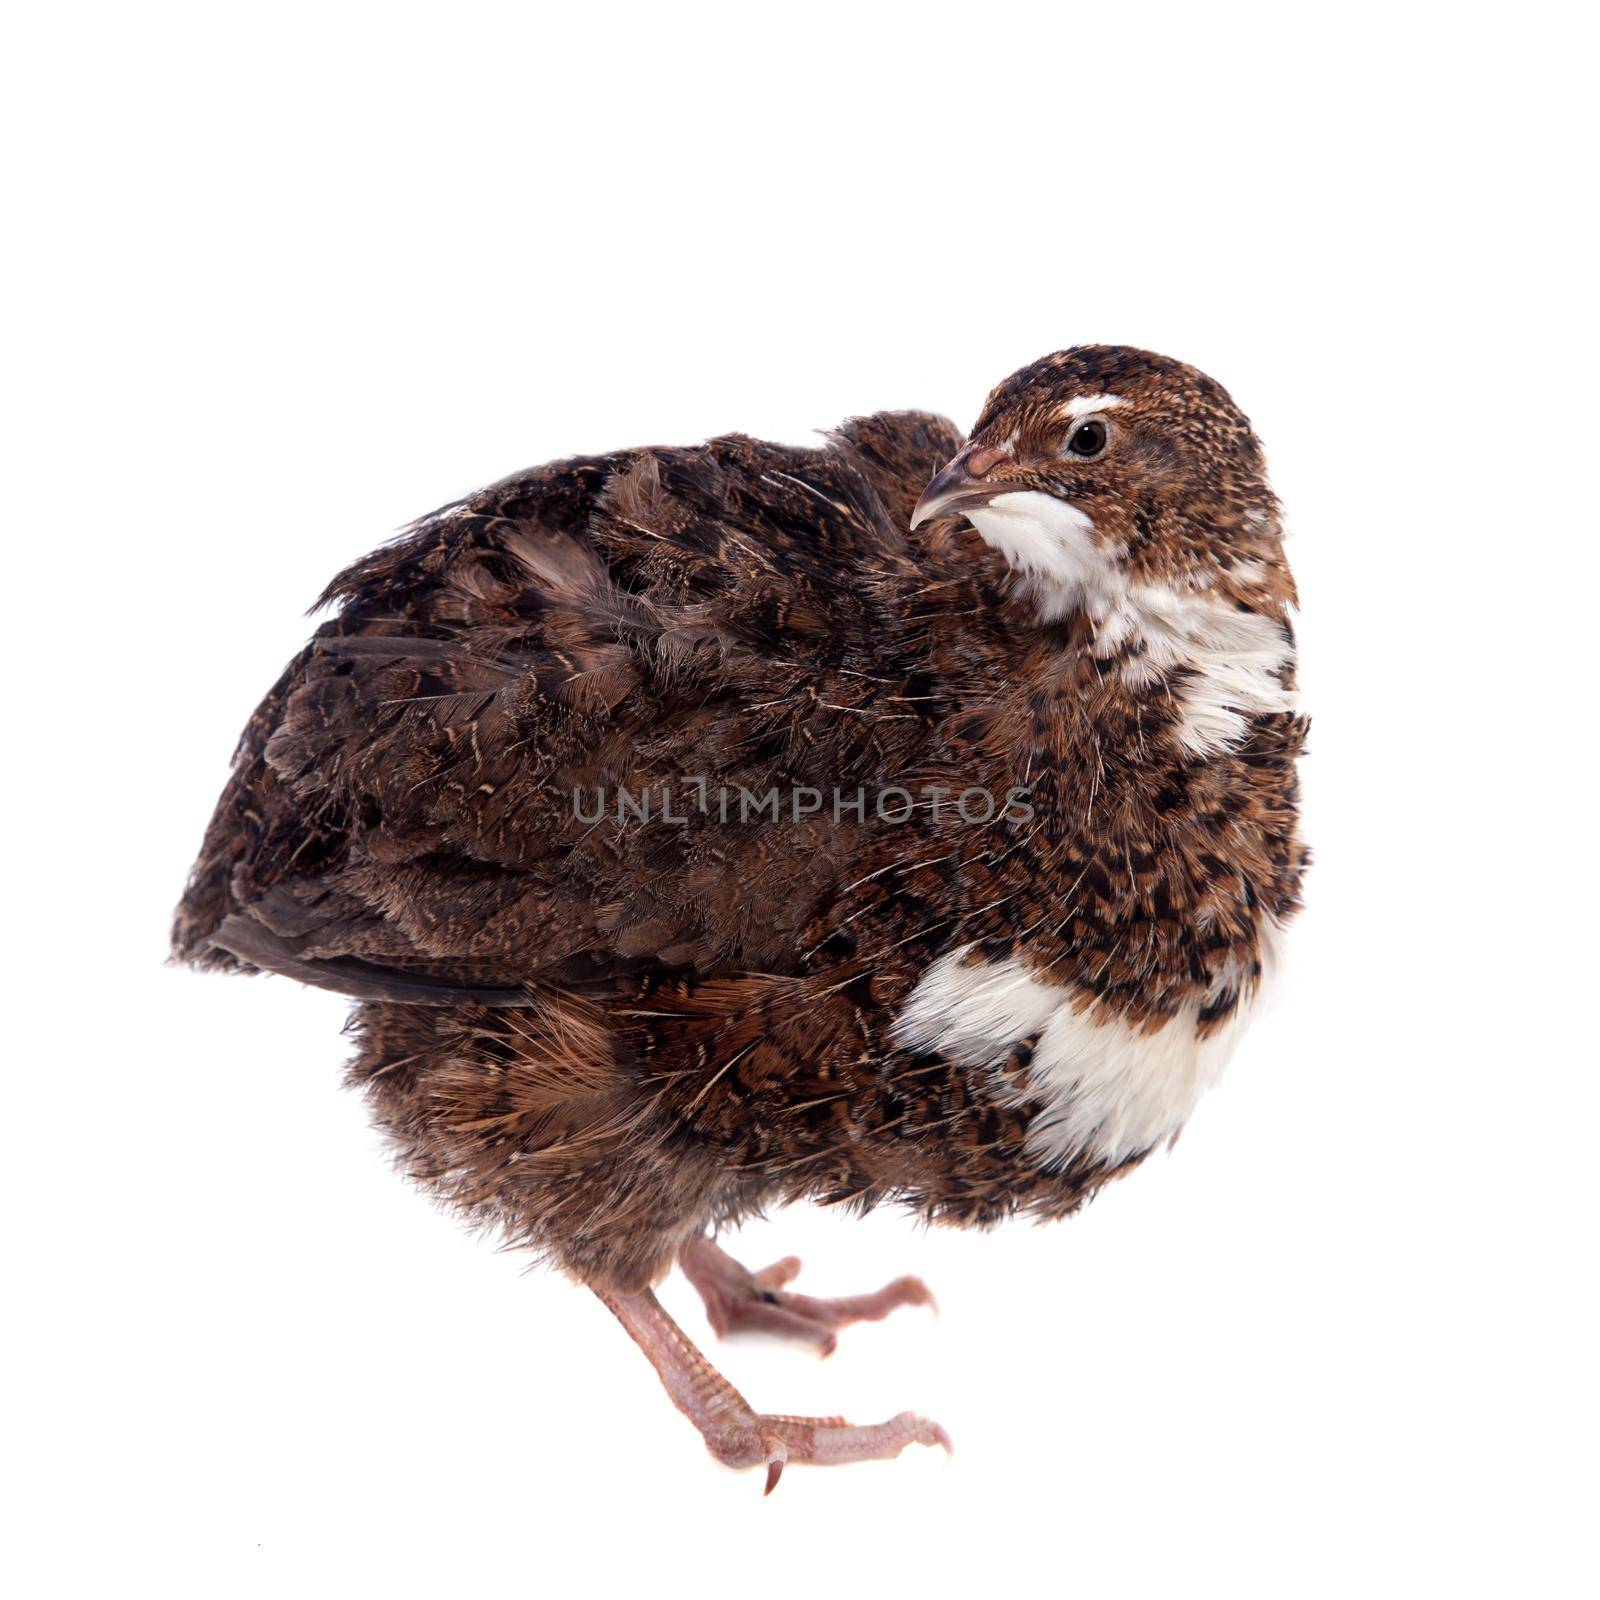 The common quail on white by RosaJay